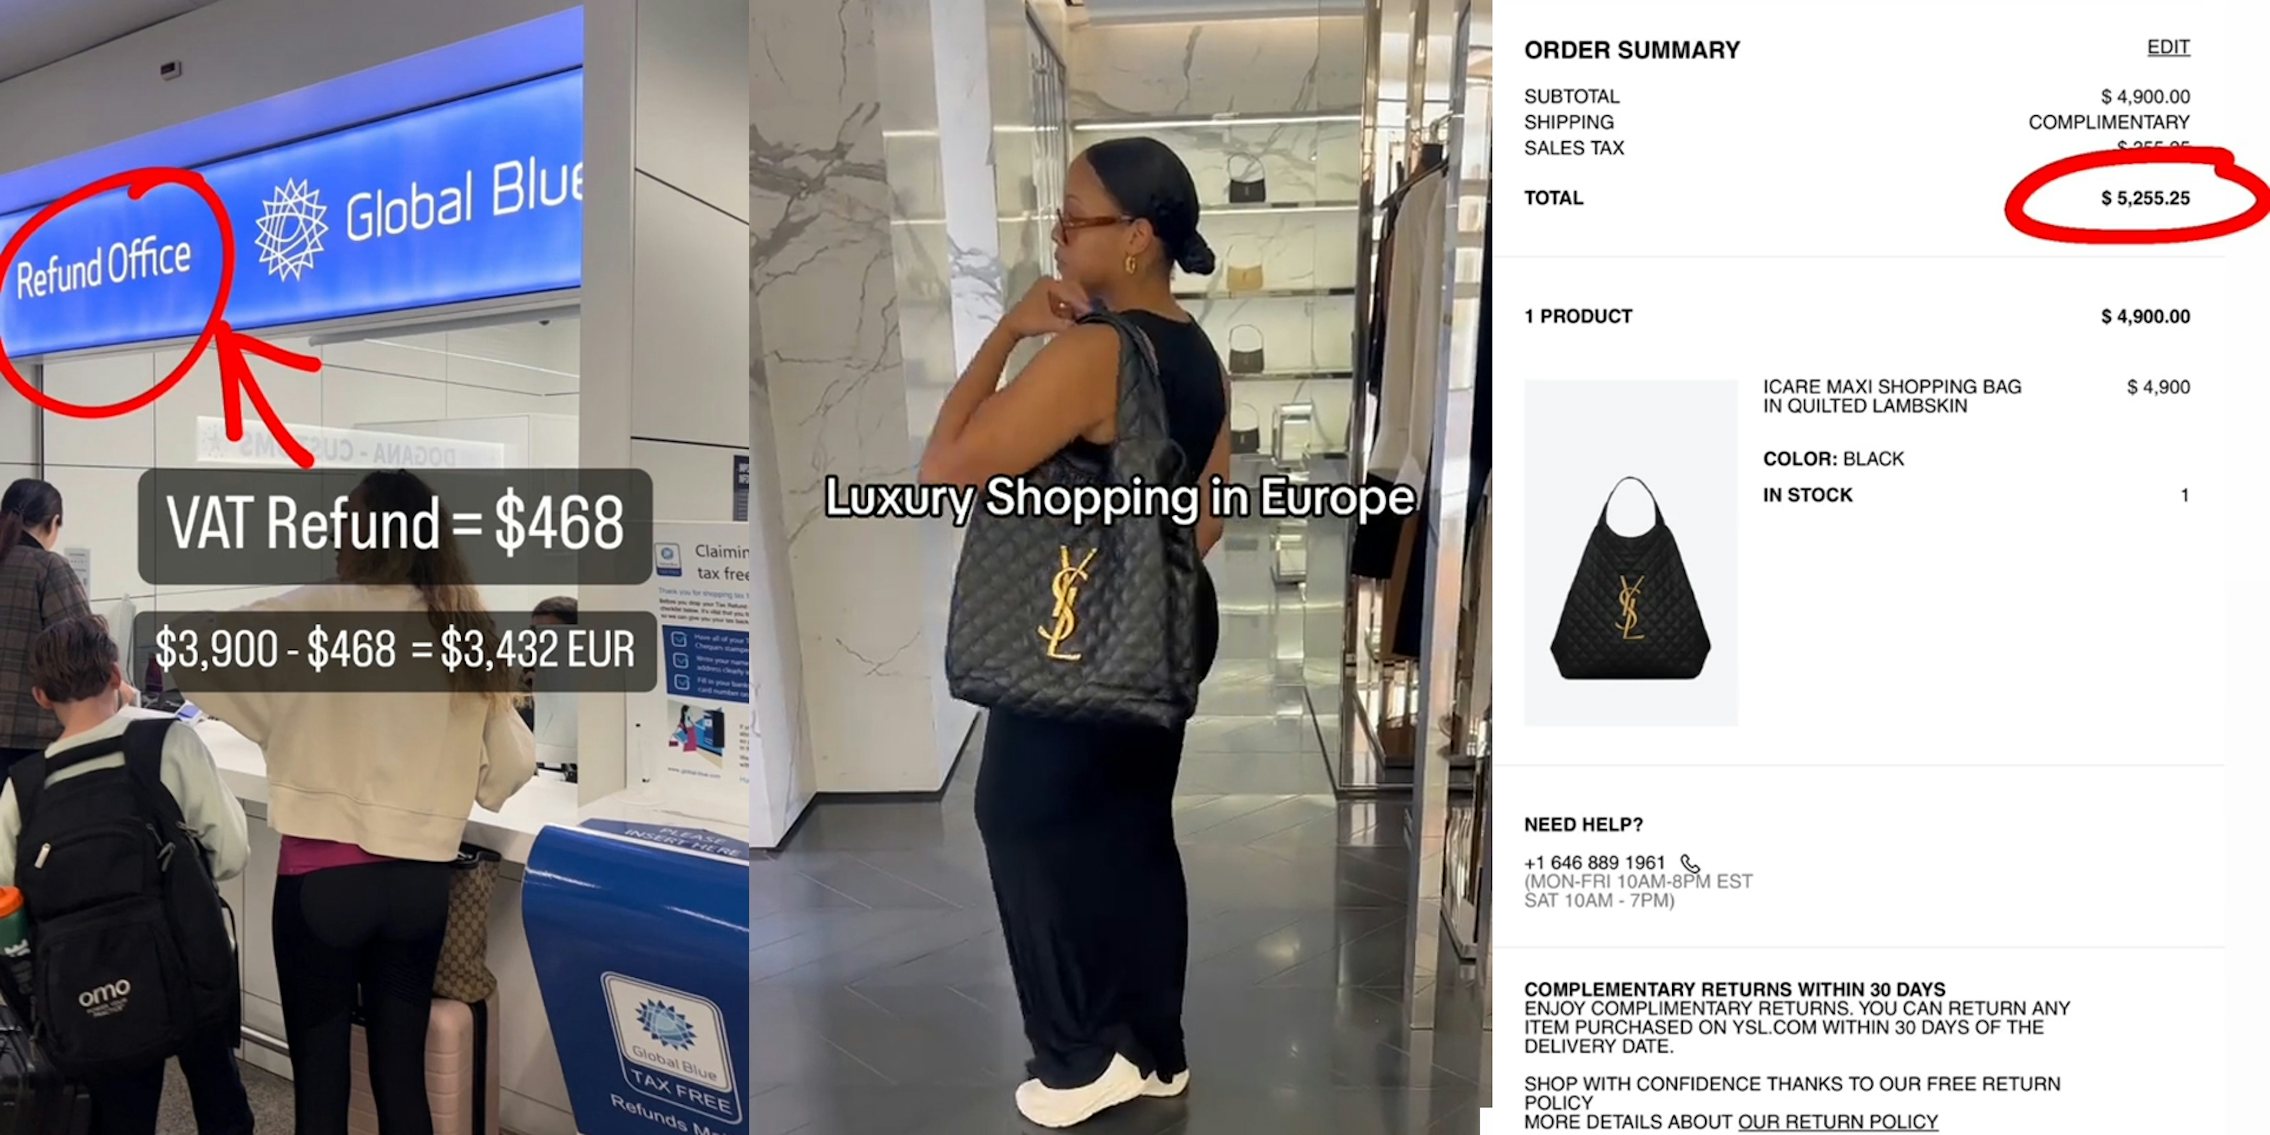 luxury shop with refund office with caption 'VAT Refund =$468 $3,900-$468=$3,432 EUR' (l) woman with luxury bag in store with caption 'Luxury Shopping in Europe' (c) YSL bag with total circled (r)